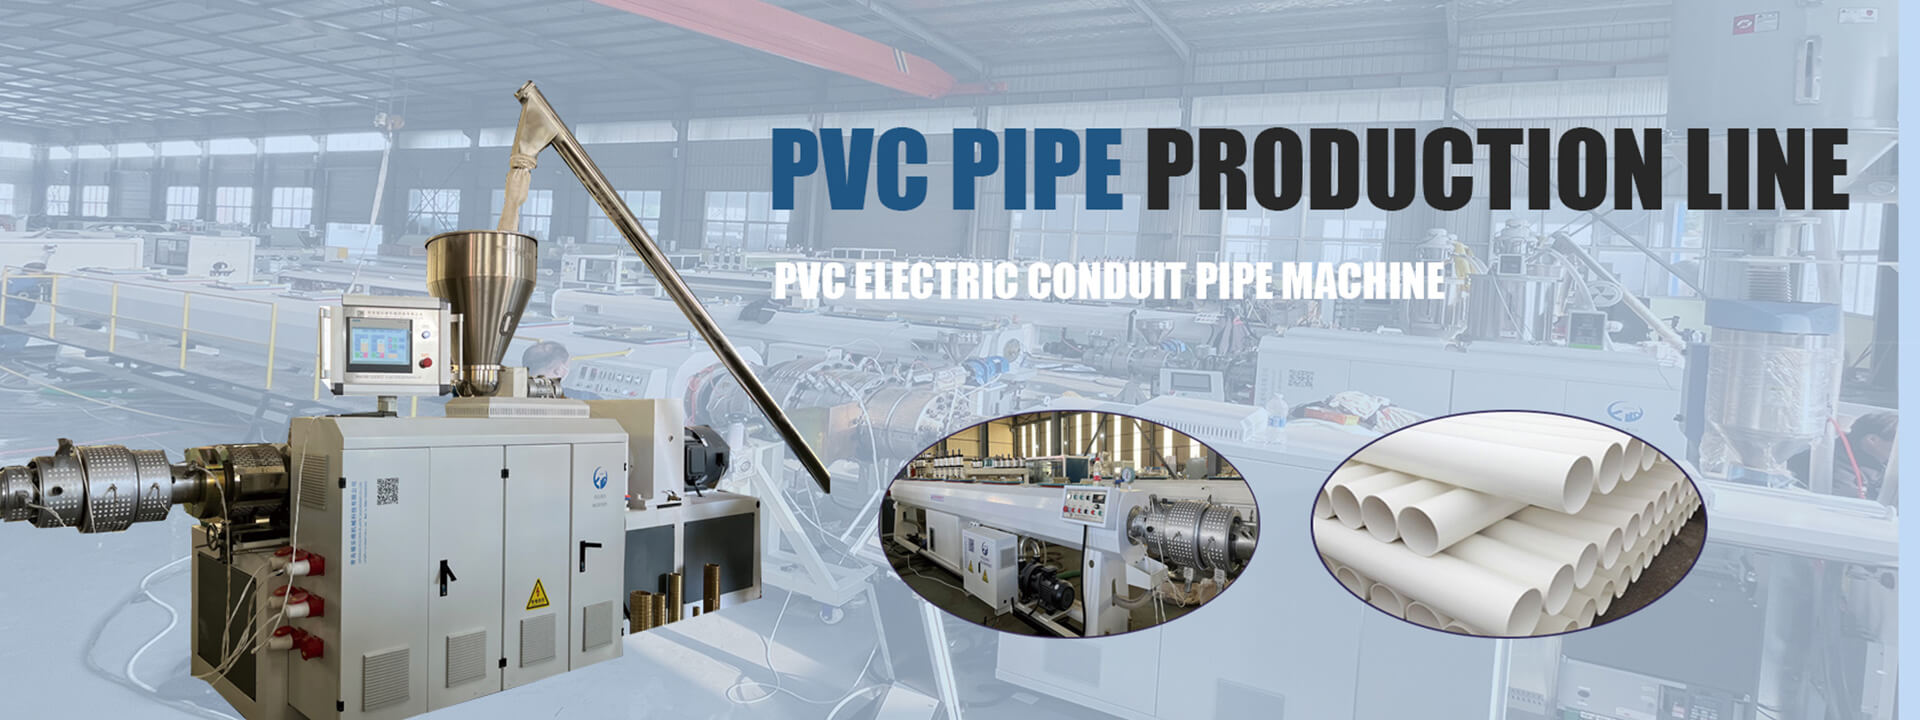 PVG PIPE PRODUCTION LINE